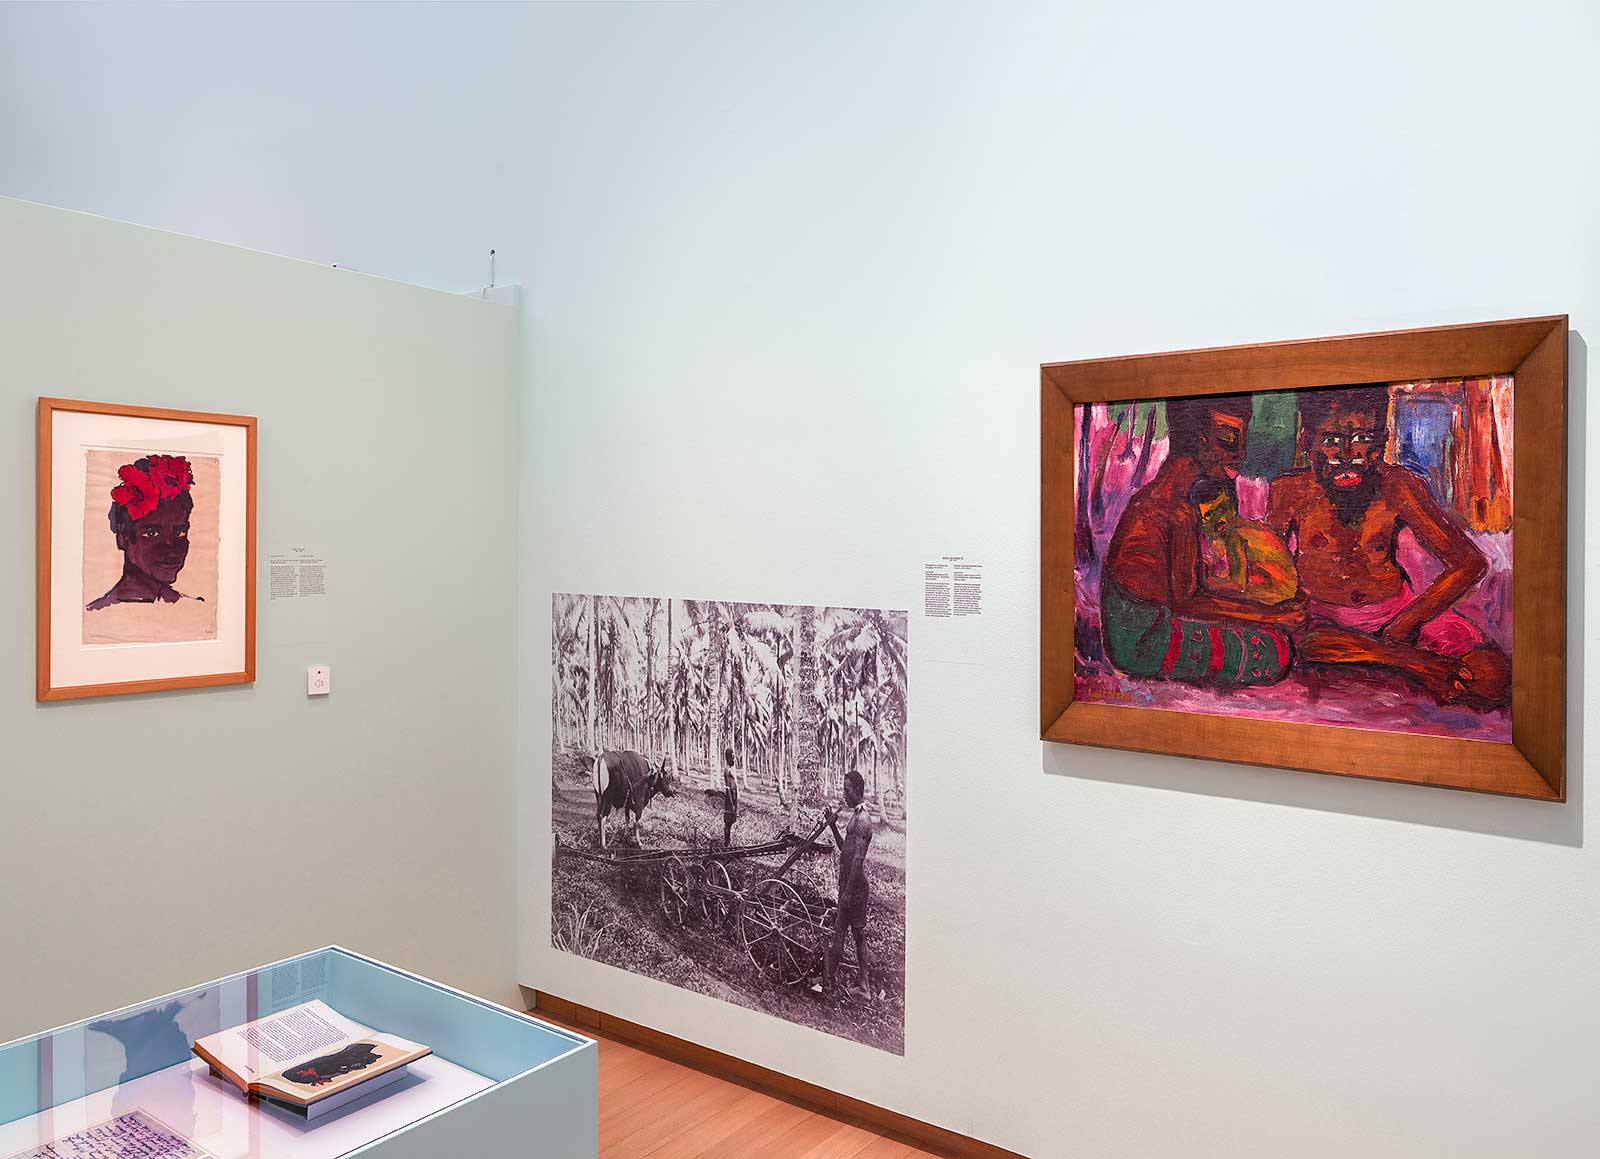 Fig. 3 Exhibition view of Kirchner and Nolde: Expressionism. Colonialism. at Stedelijk Museum Amsterdam, 2021. Juxtapositions of Nolde’s New Guinea artworks with contemporaneous photographs. Photo: Gert-Jan van Rooij. Left to right: Emil Nolde, Jupualo, 1913–14, watercolor and India ink on paper, 47.4 x 34.9 cm, Nolde Foundation Seebüll; Heinz von Sigriz, Plantation Cultivator of the New Guinea Company, 1912–13, reproduction Photography Collection Museum Fünf Kontinente, Munich; Emil Nolde, Familie, 1914, oil on canvas, 71 x 105 cm, Nolde Foundation Seebüll.